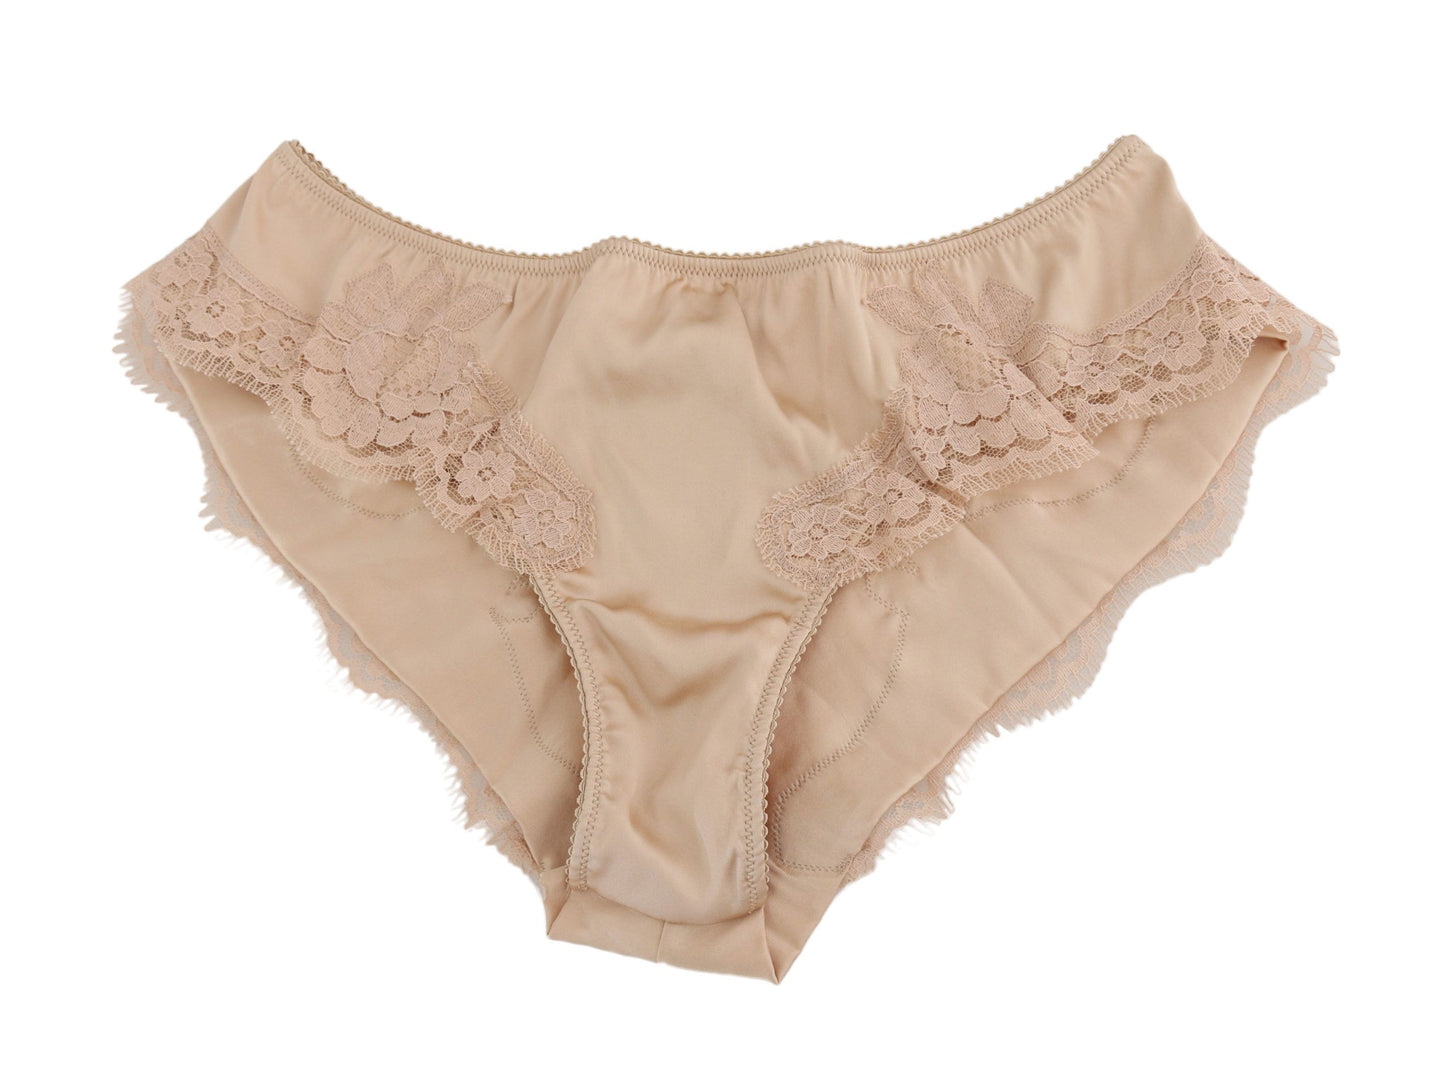 Beige Silk Floral Stretch Underwear - Designed by Dolce & Gabbana Available to Buy at a Discounted Price on Moon Behind The Hill Online Designer Discount Store